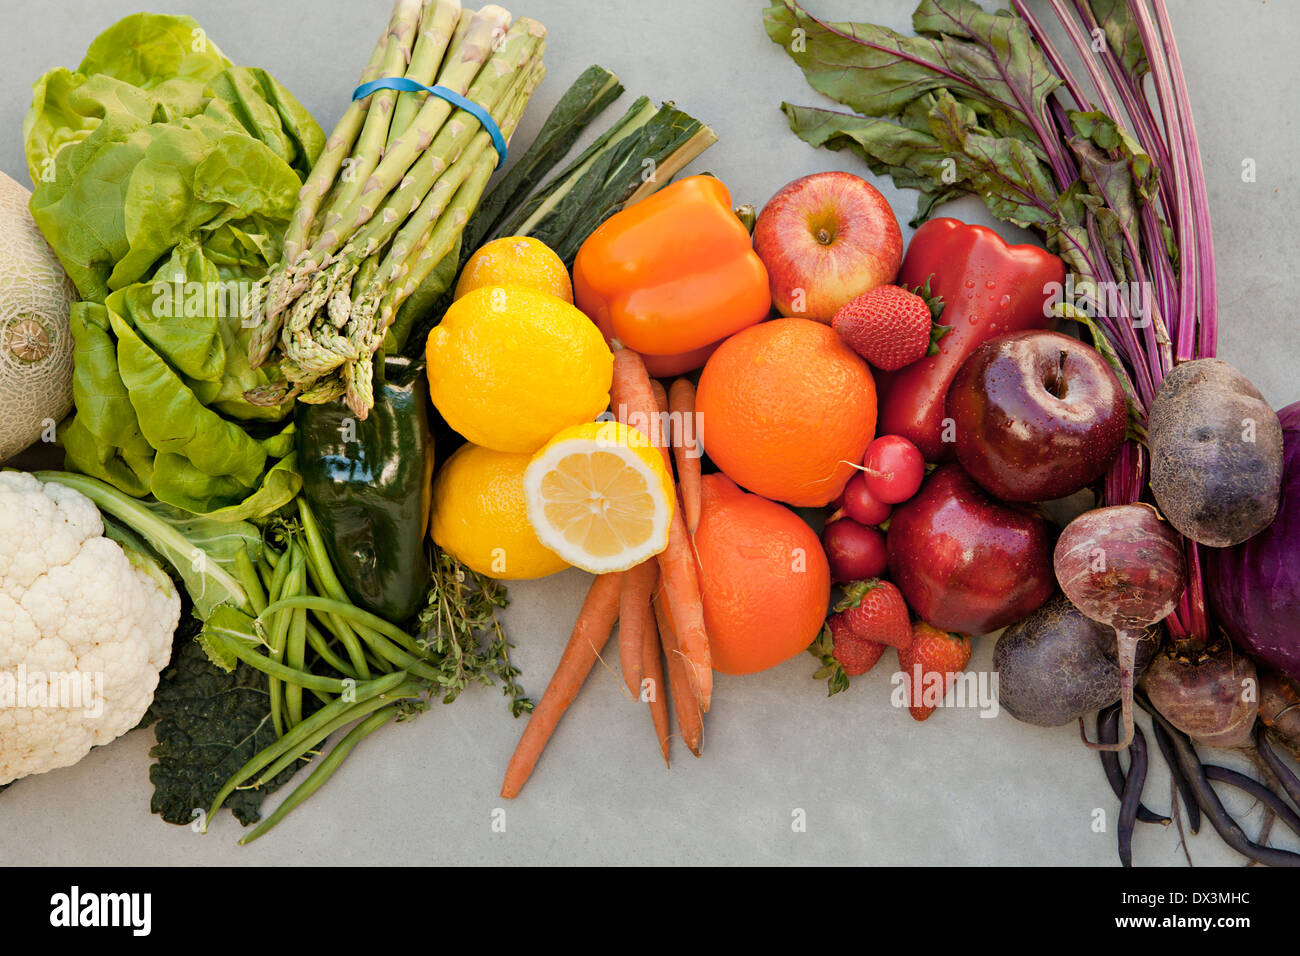 Abundant variety of multicolor fruits and vegetables organized by color on gray background, directly above Stock Photo